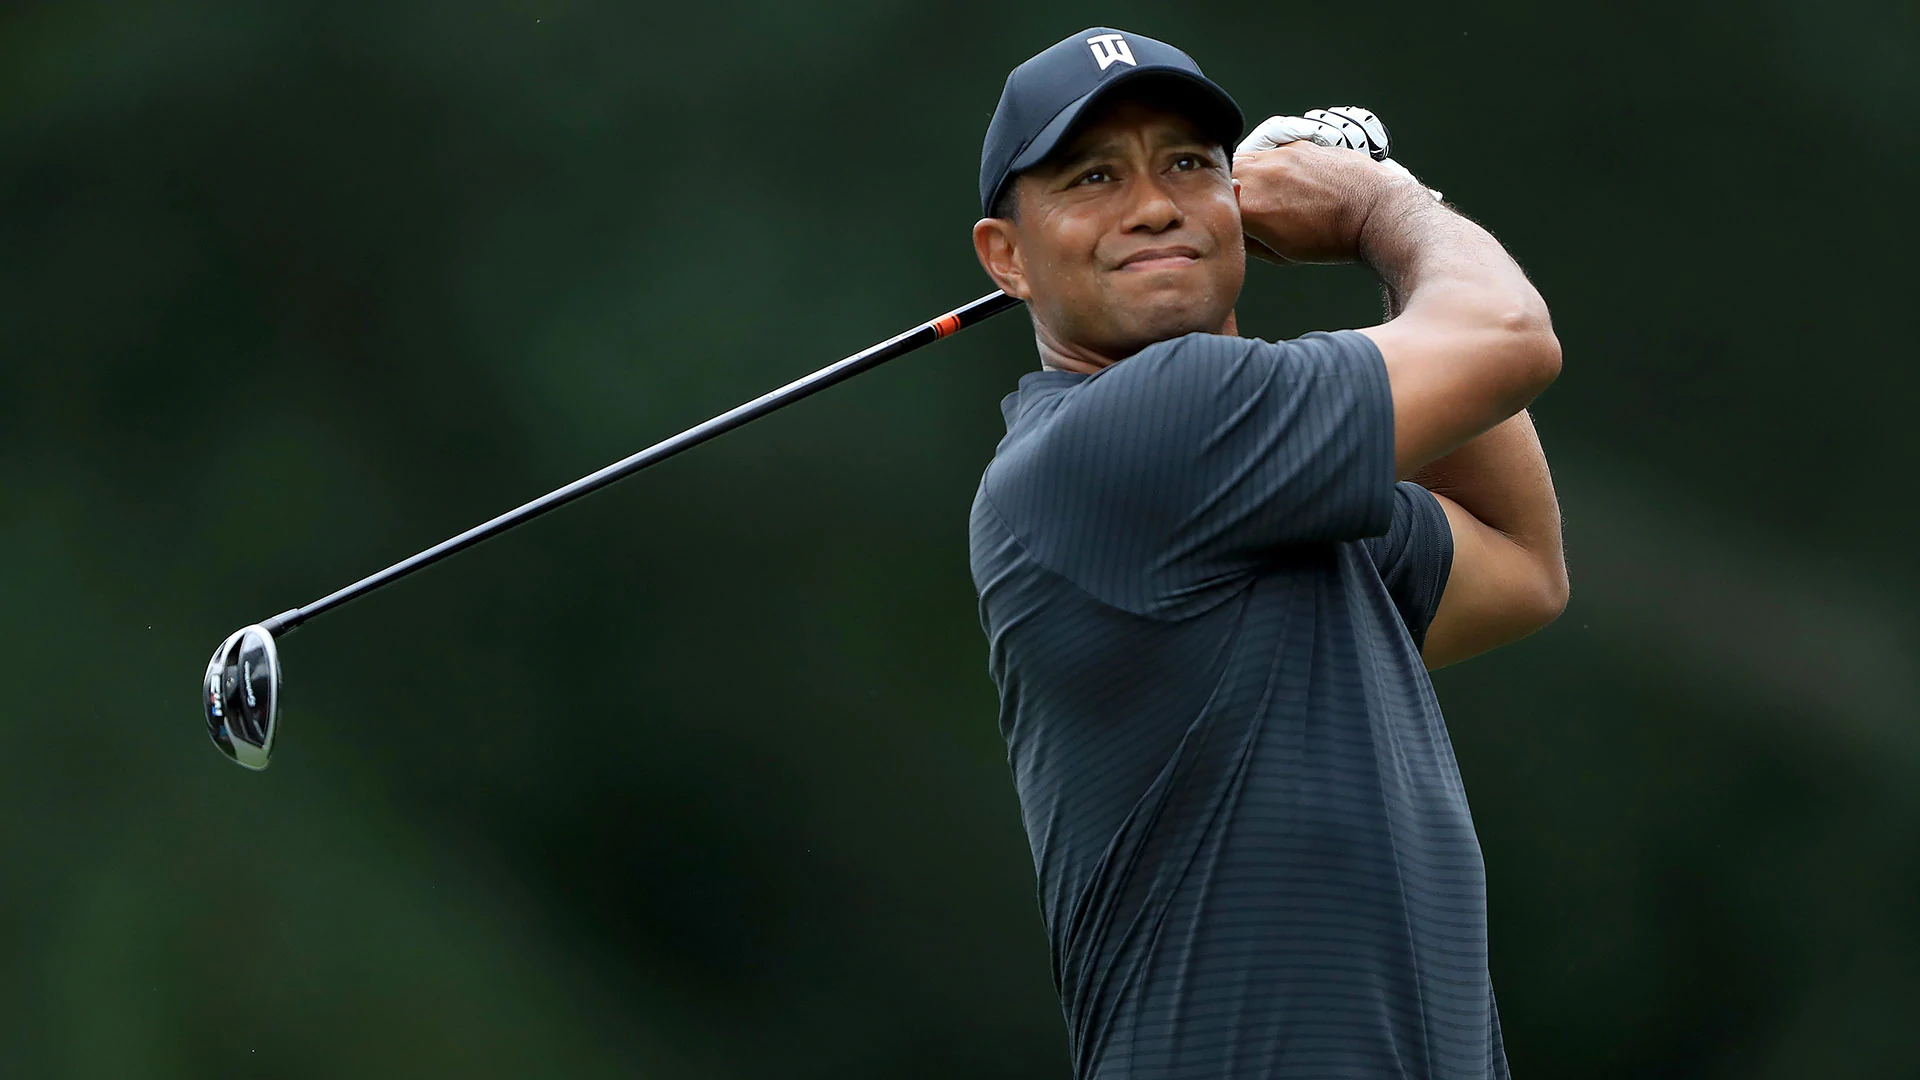 Woods returning to Bellerive for first time since 9/11